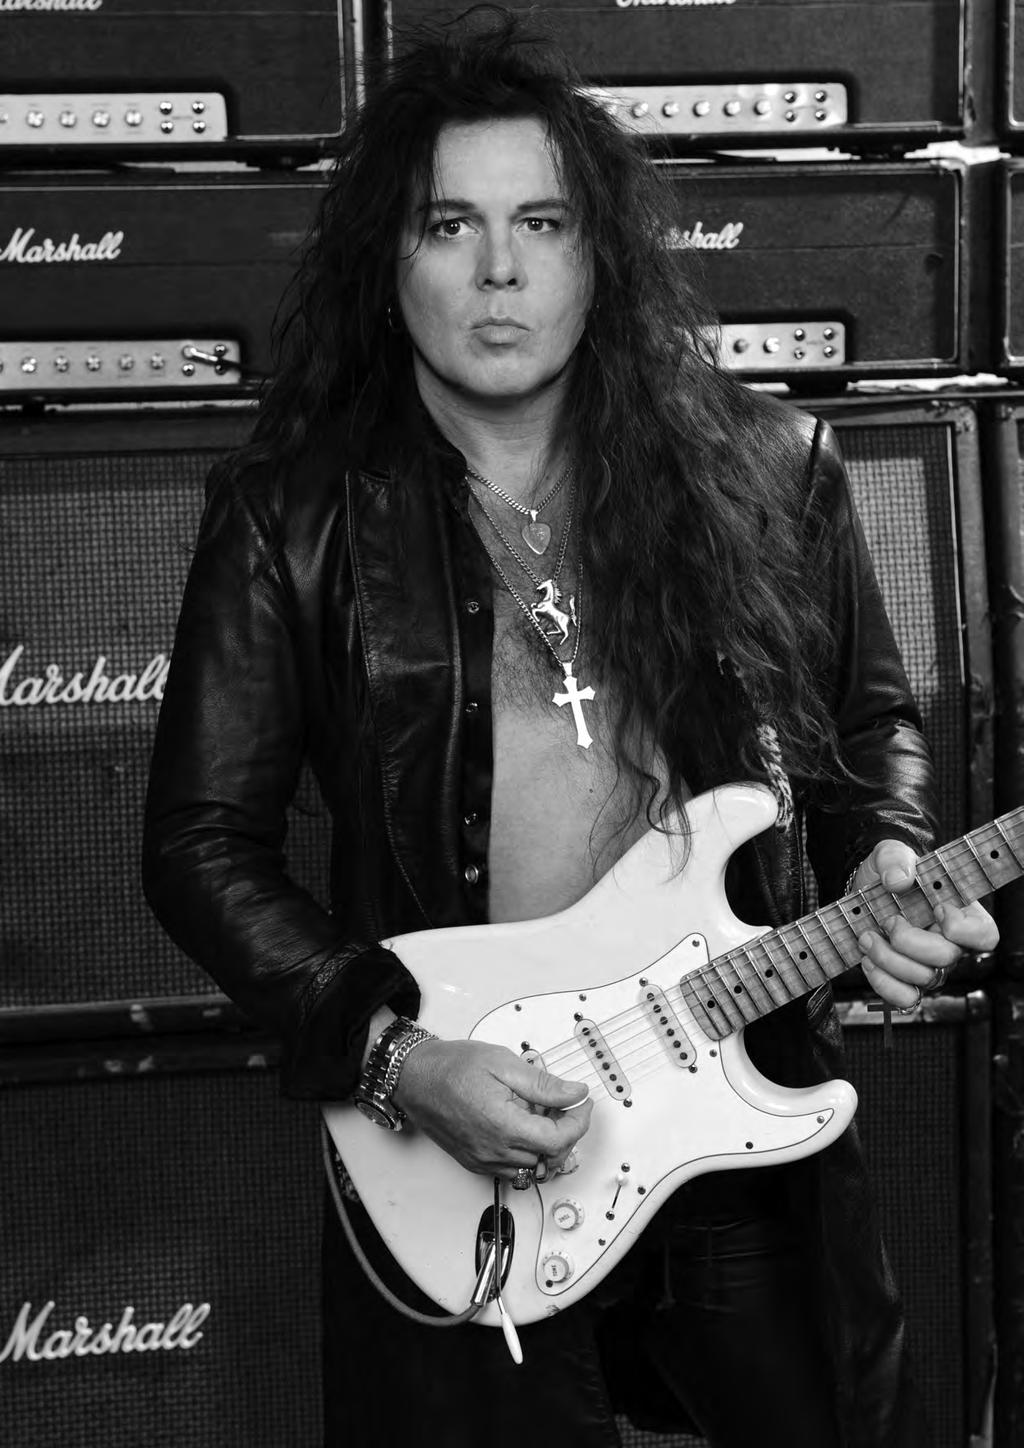 From Jim Marshall Congratulations on purchasing the YJM100, our Signature Series tribute to one of the most revered and technically gifted guitarists I have ever known Yngwie Malmsteen.